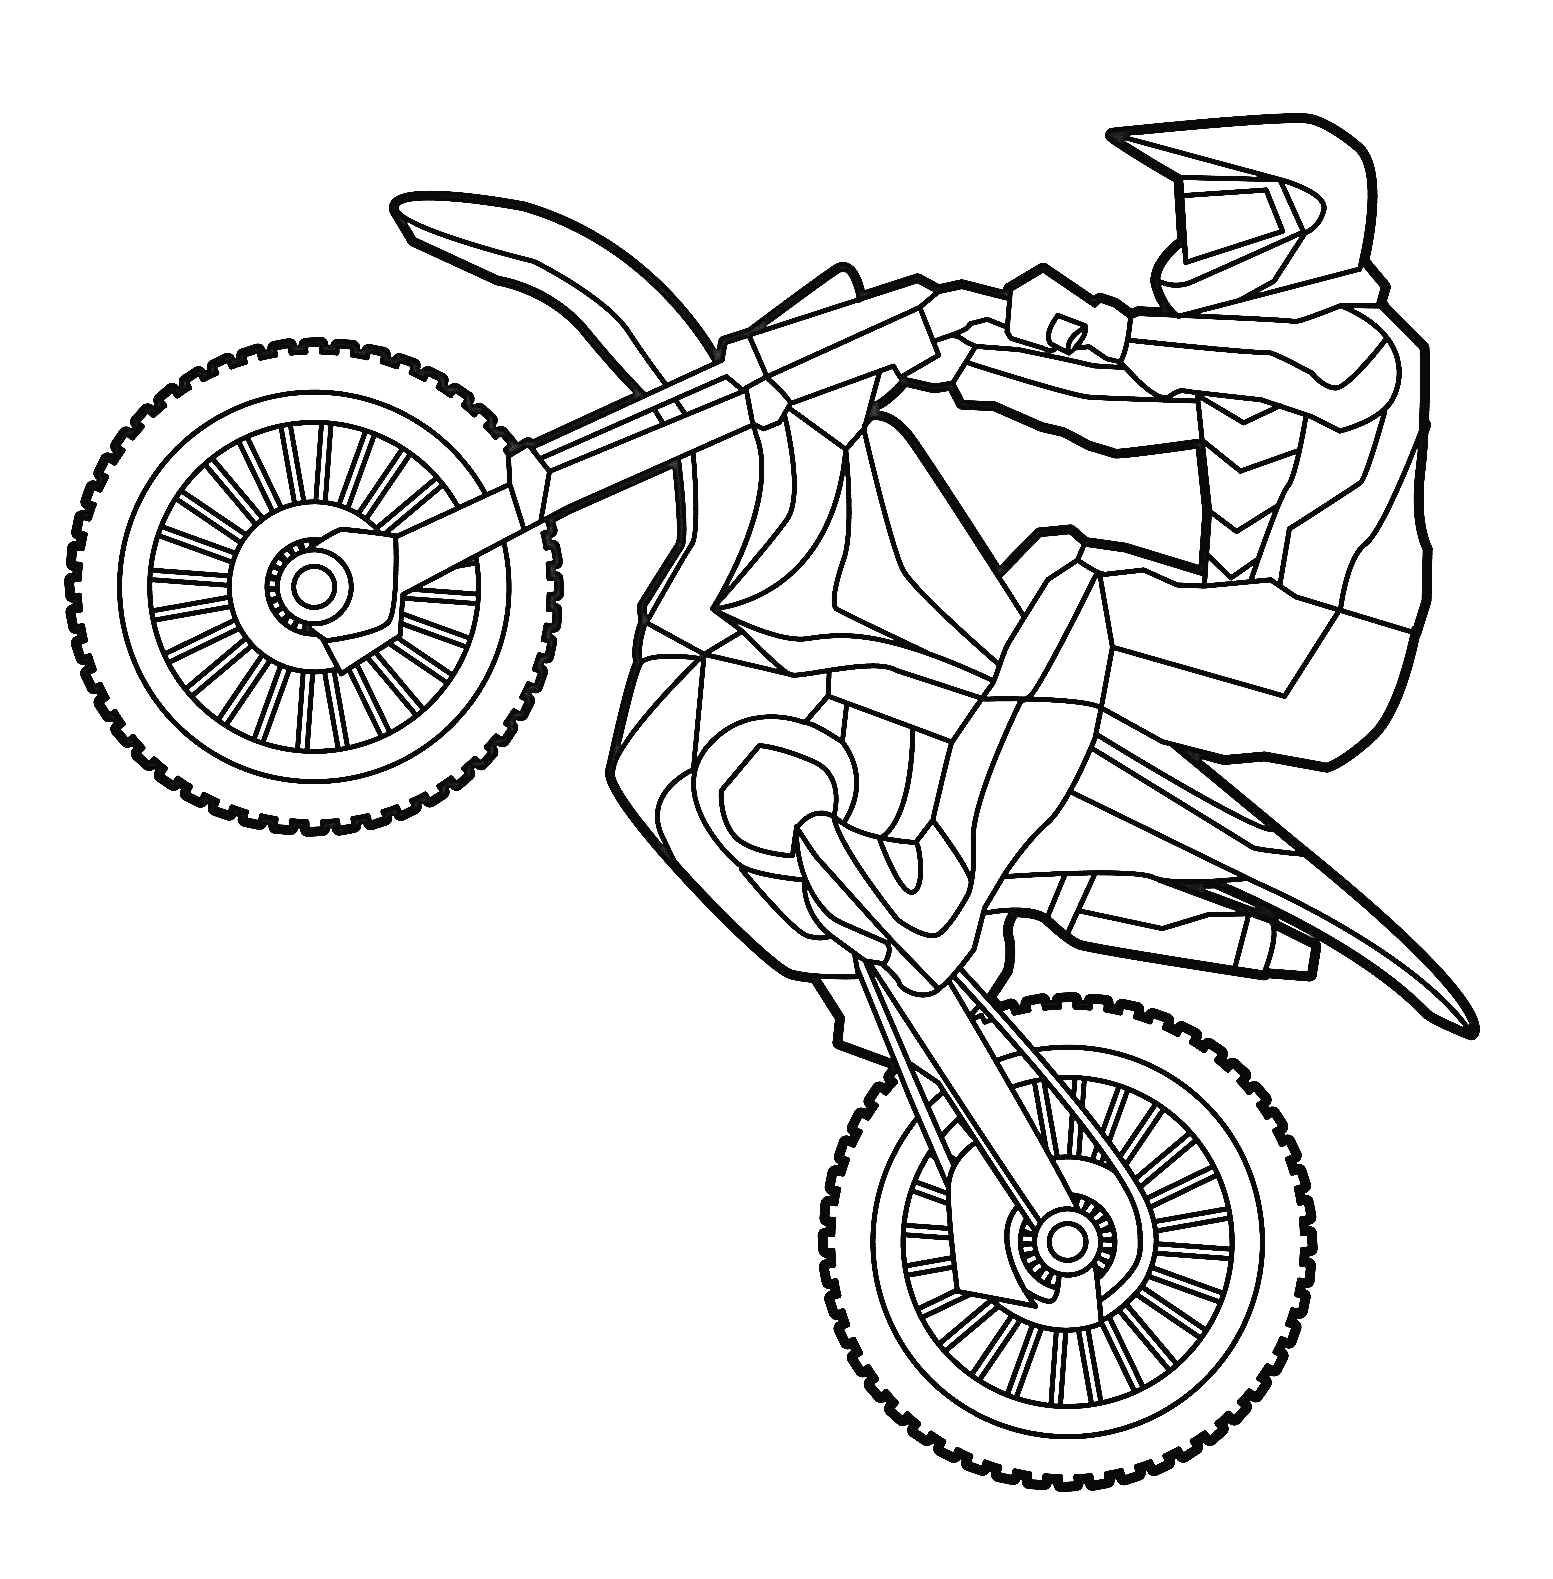 Dirt Bike coloring pages